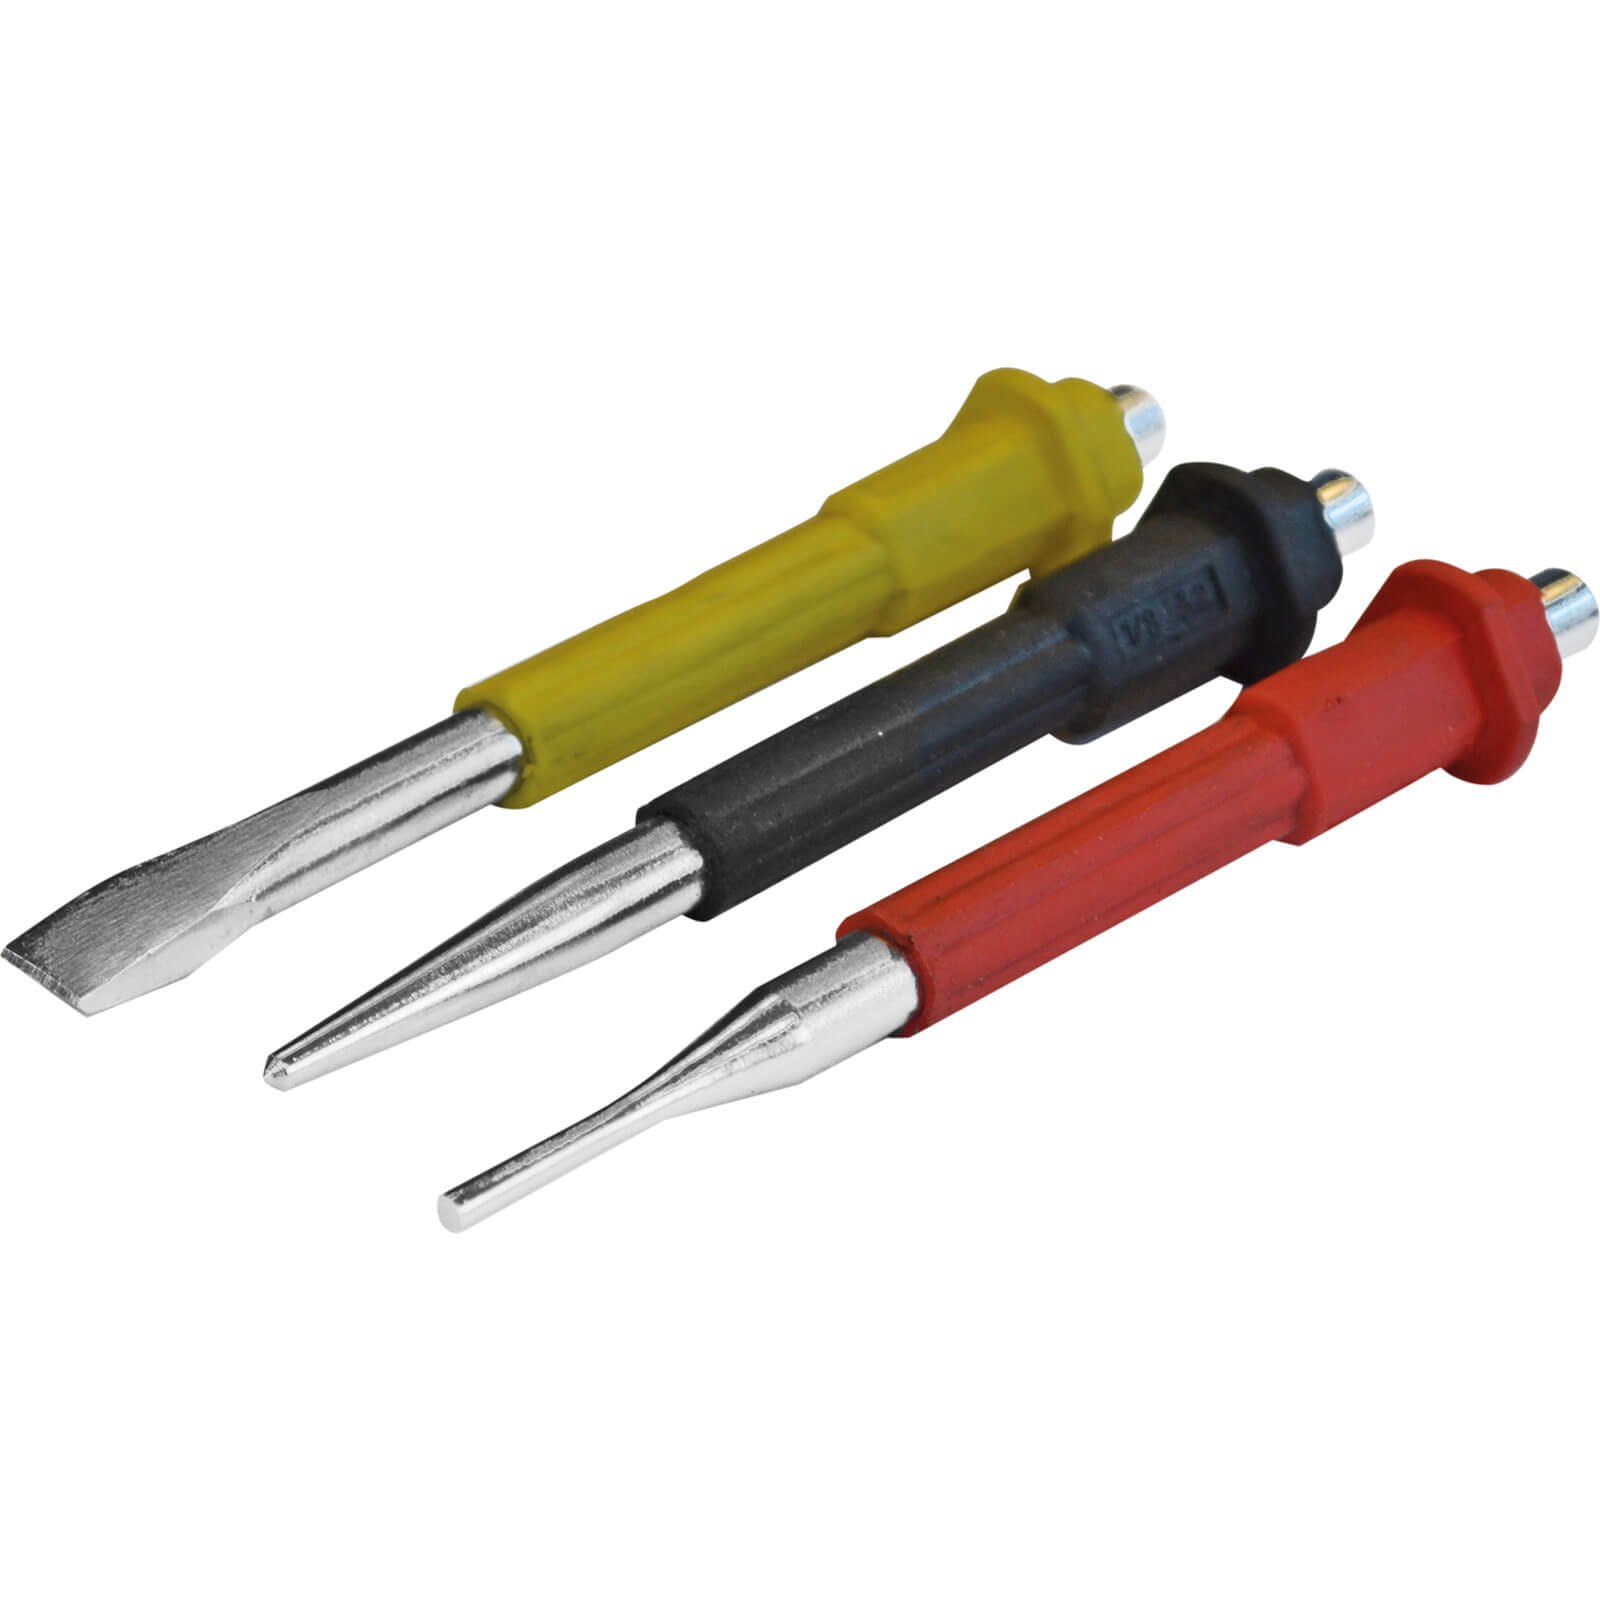 Image of Roughneck 3 Piece Cold Chisel and Punch Set